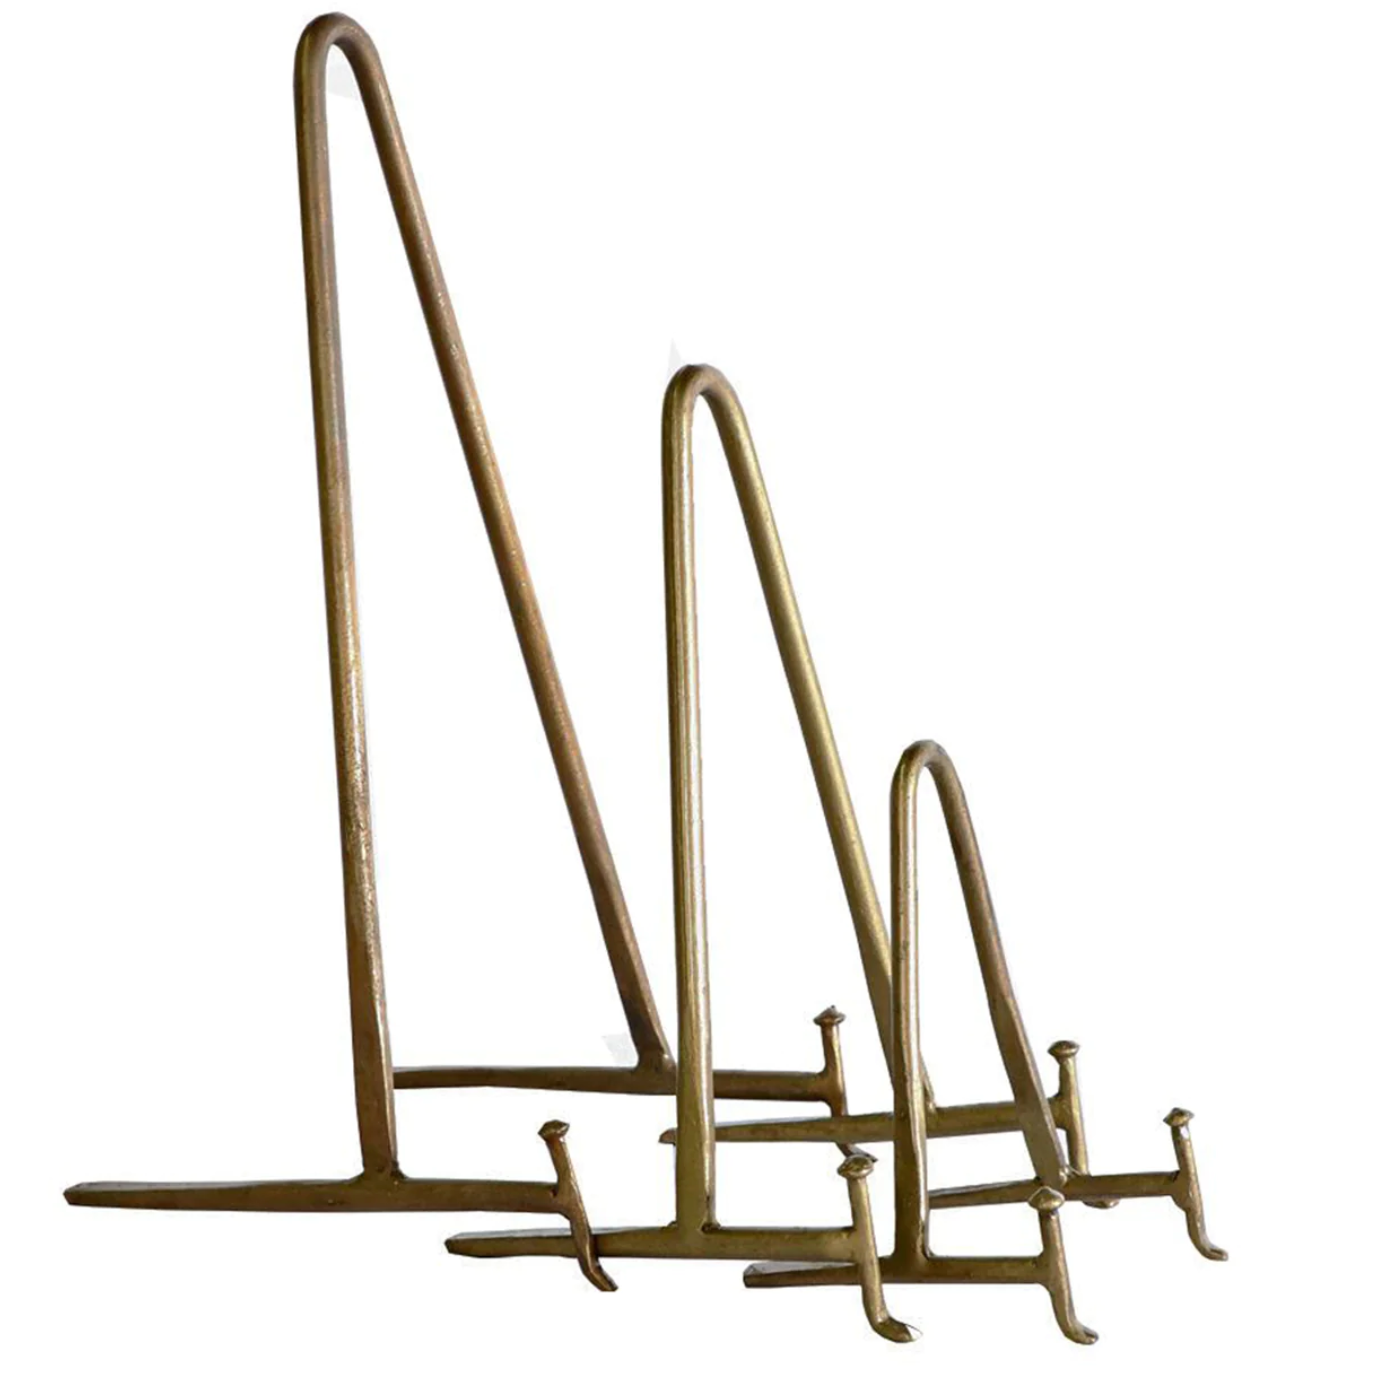 Antique Brass Art Easels Display Stands